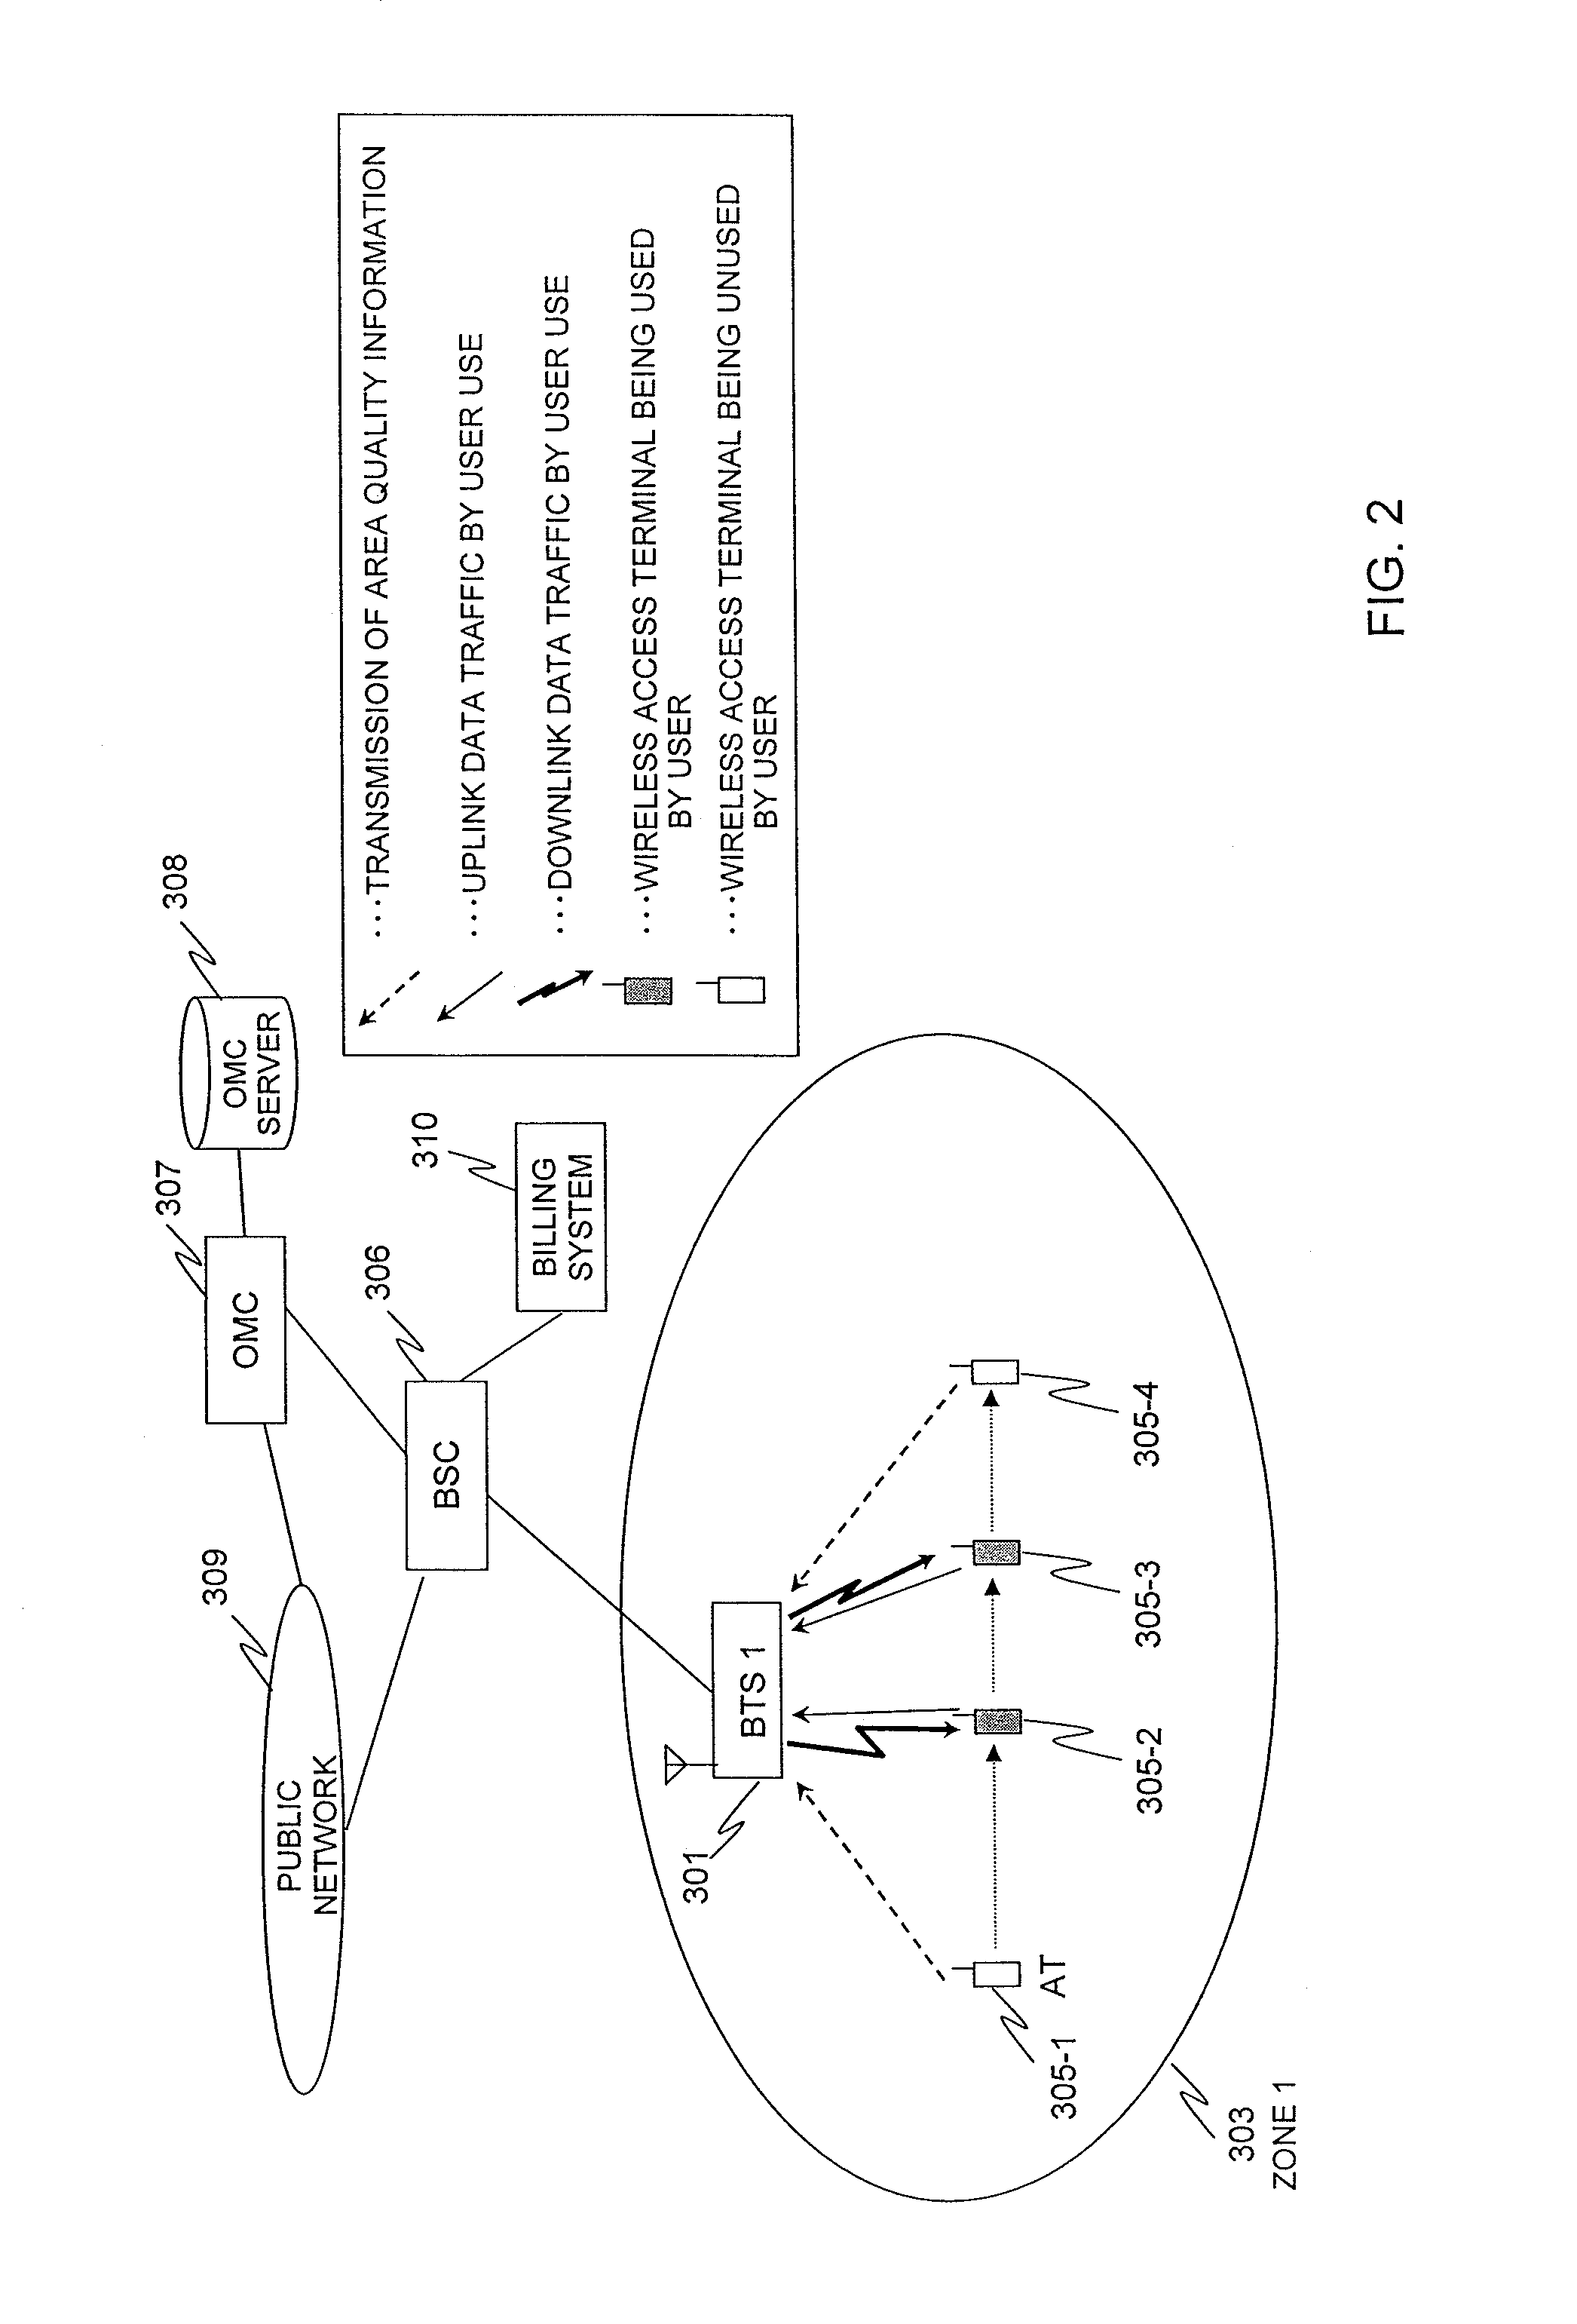 Radio Service Area Quality Information Acquisition System